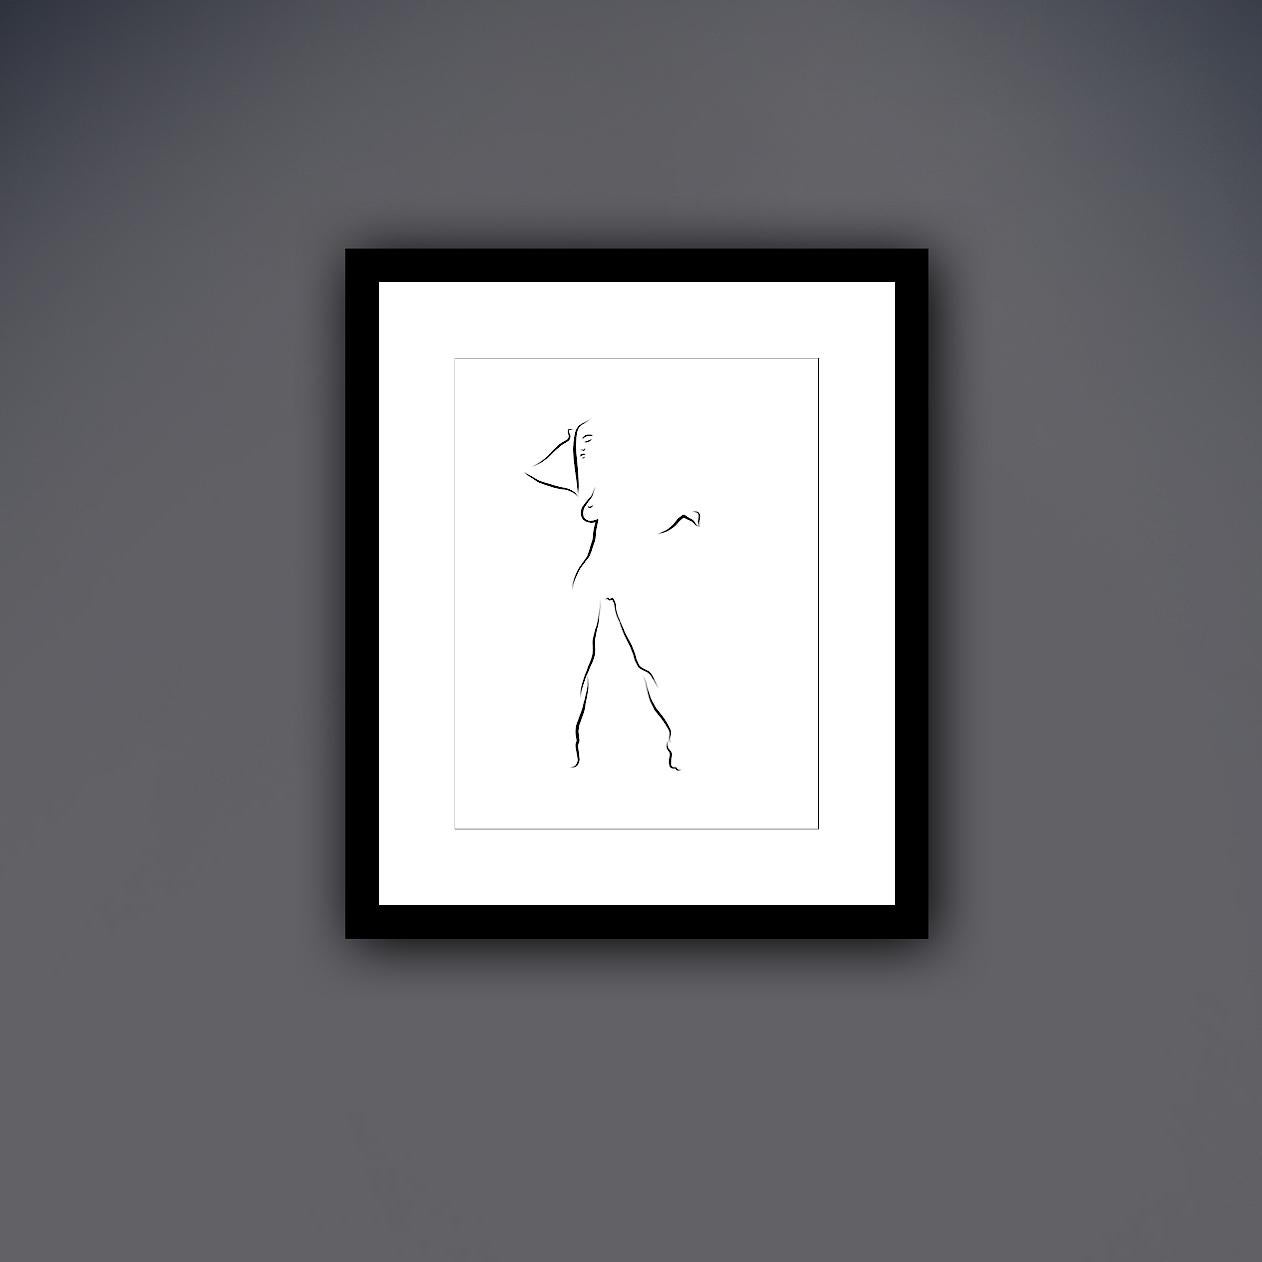 Haiku #50, 1/50 - Digital Vector Drawing Standing Female Nude Woman Figure

This is a limited edition (50) digital black & white print of a standing female nude, executed in 17 vector lines. It is part of a series called Haiku, after the style of